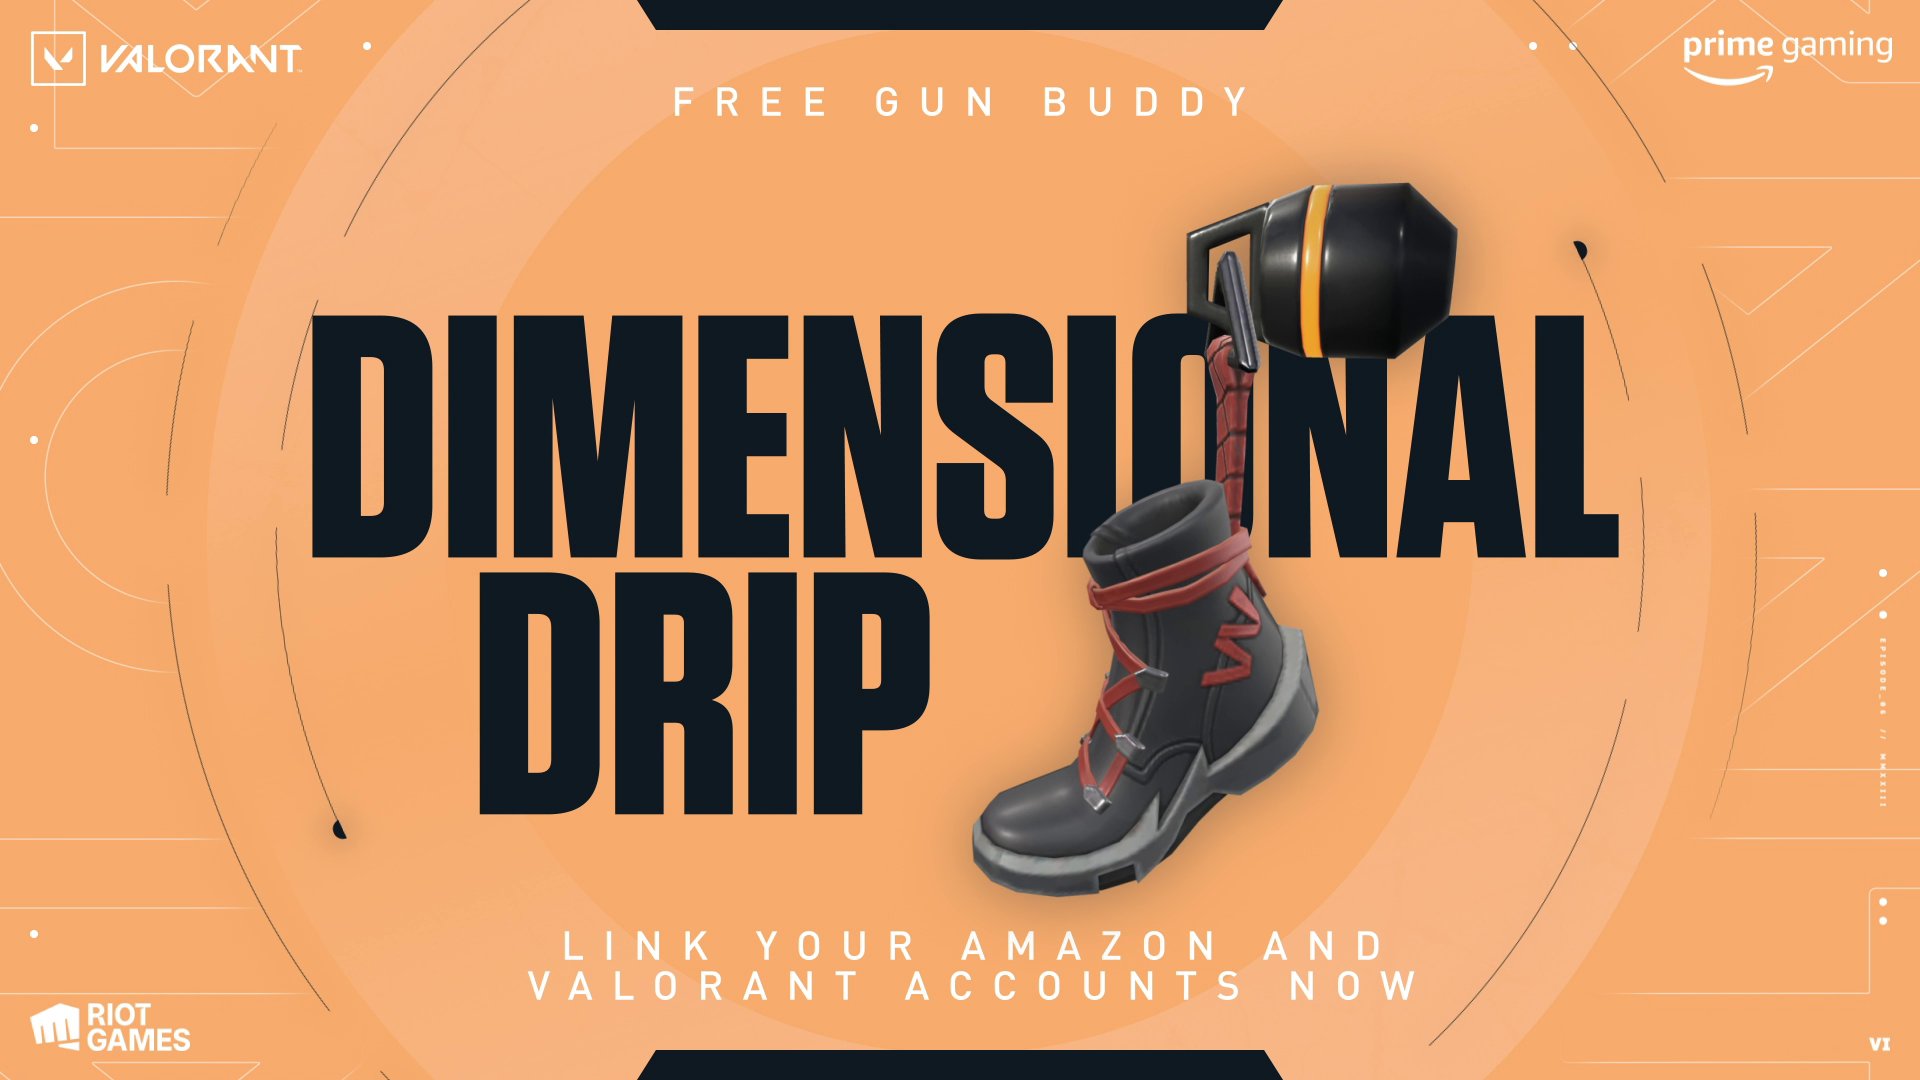 Step in style with the Dimensional Drip Gun Buddy. Exclusively